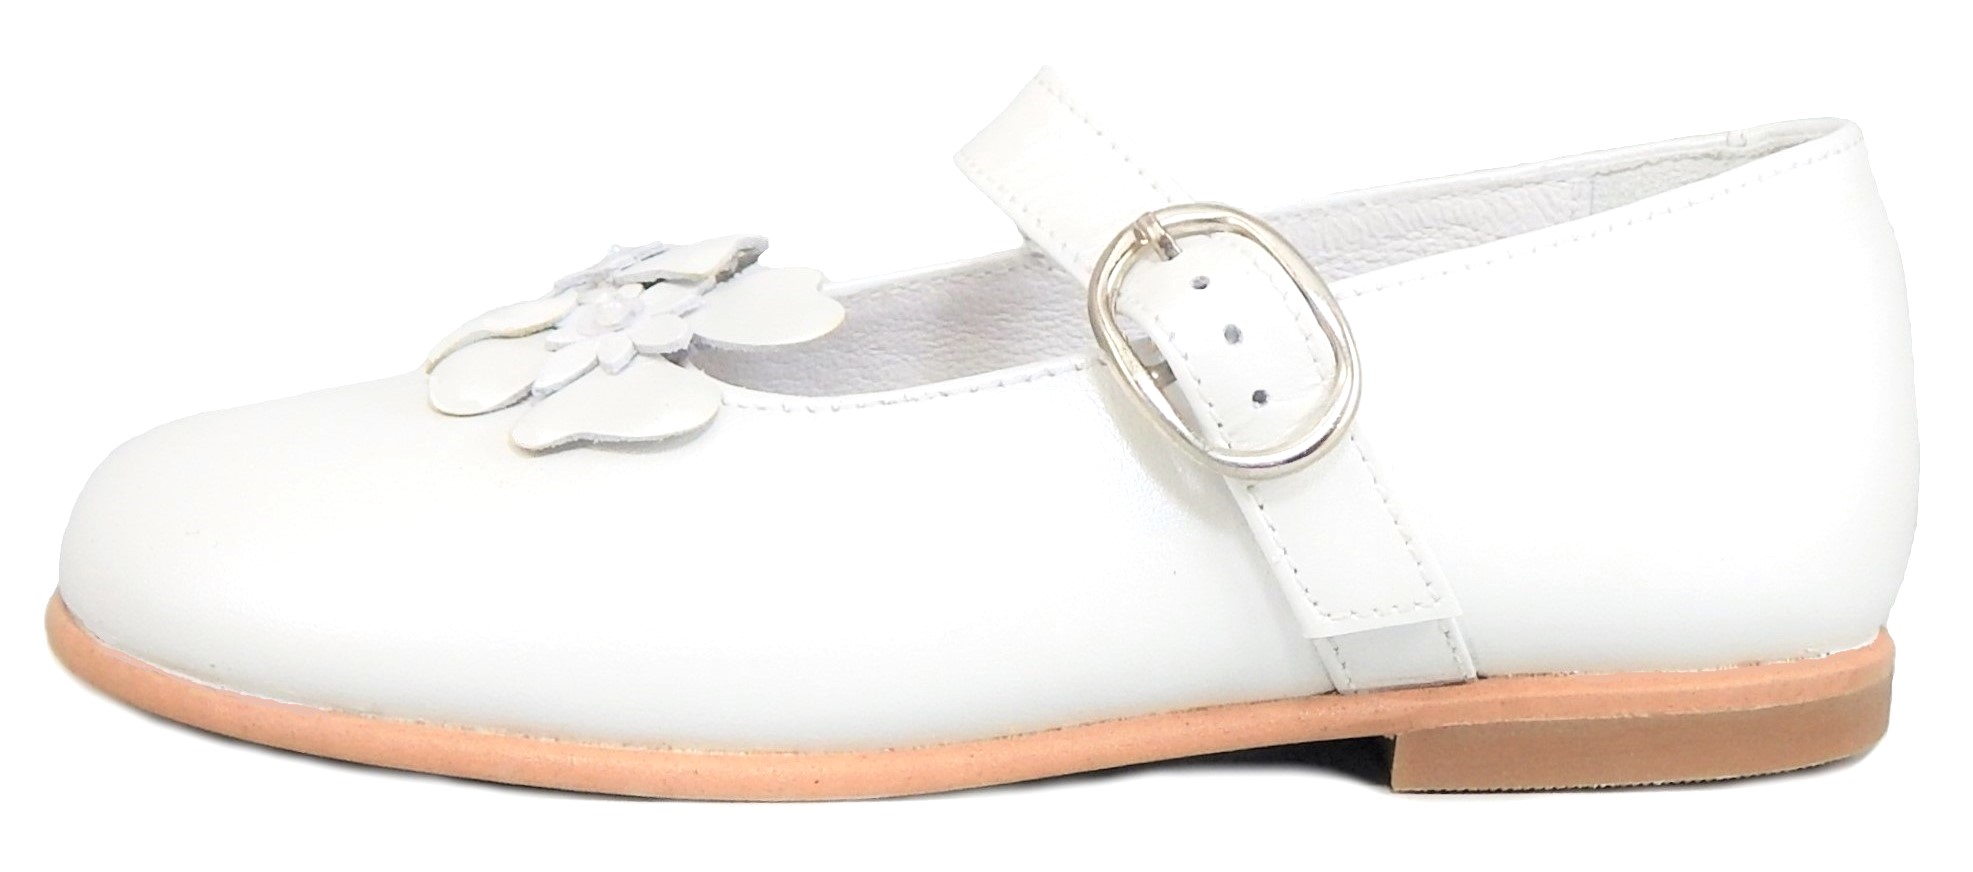 K-1082 - White Pearlized Mary Janes